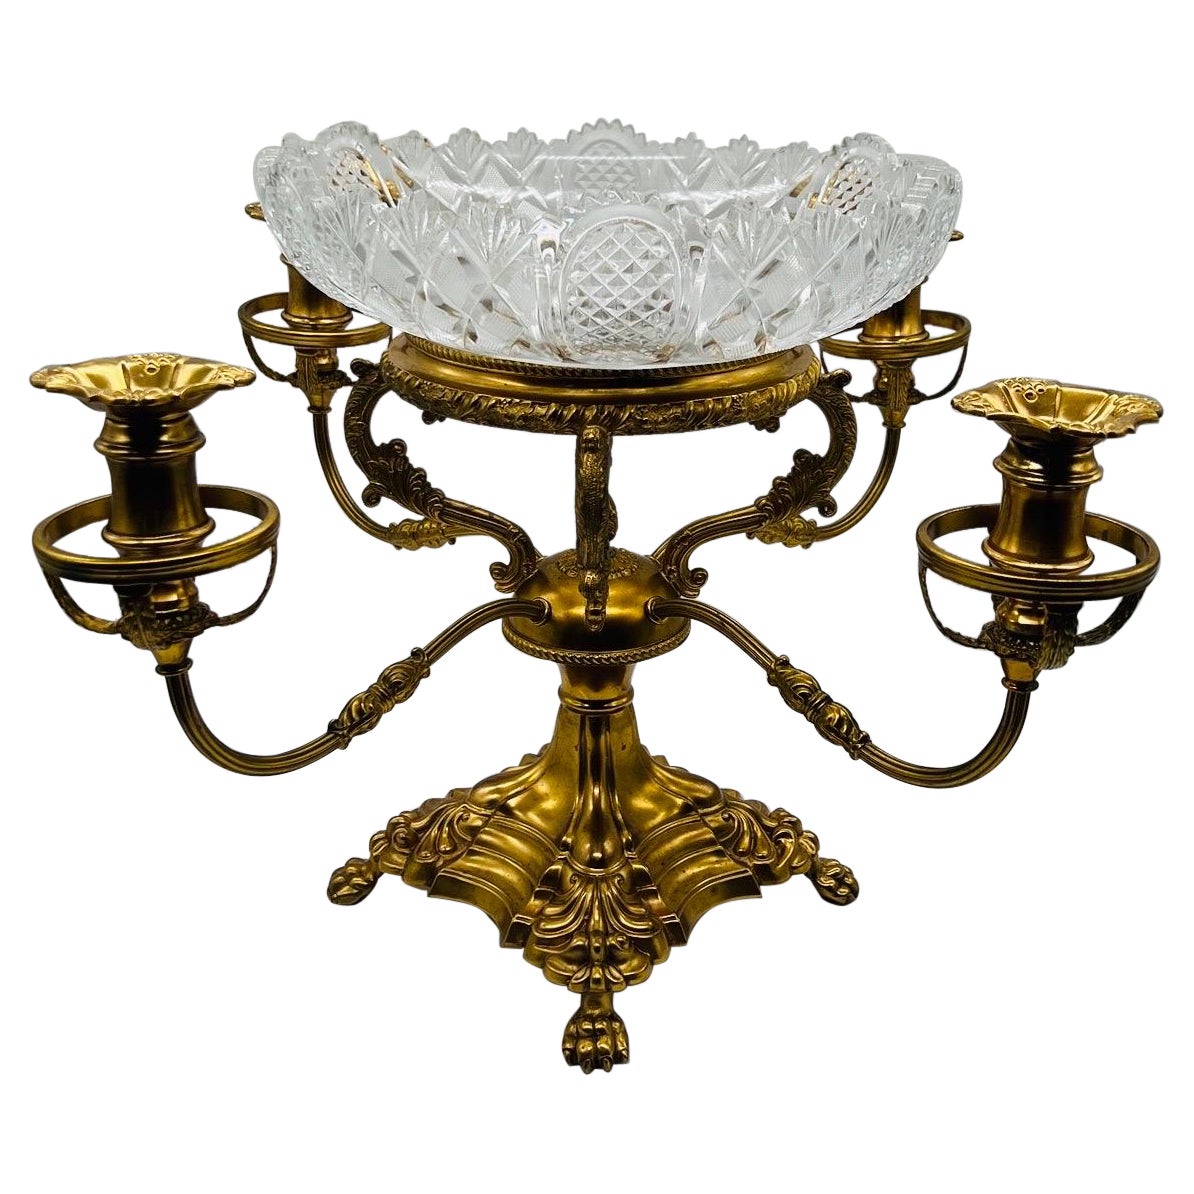 English Sheffield Gilt Plated William IV Style Cut Glass Epergne or Centerpiece For Sale